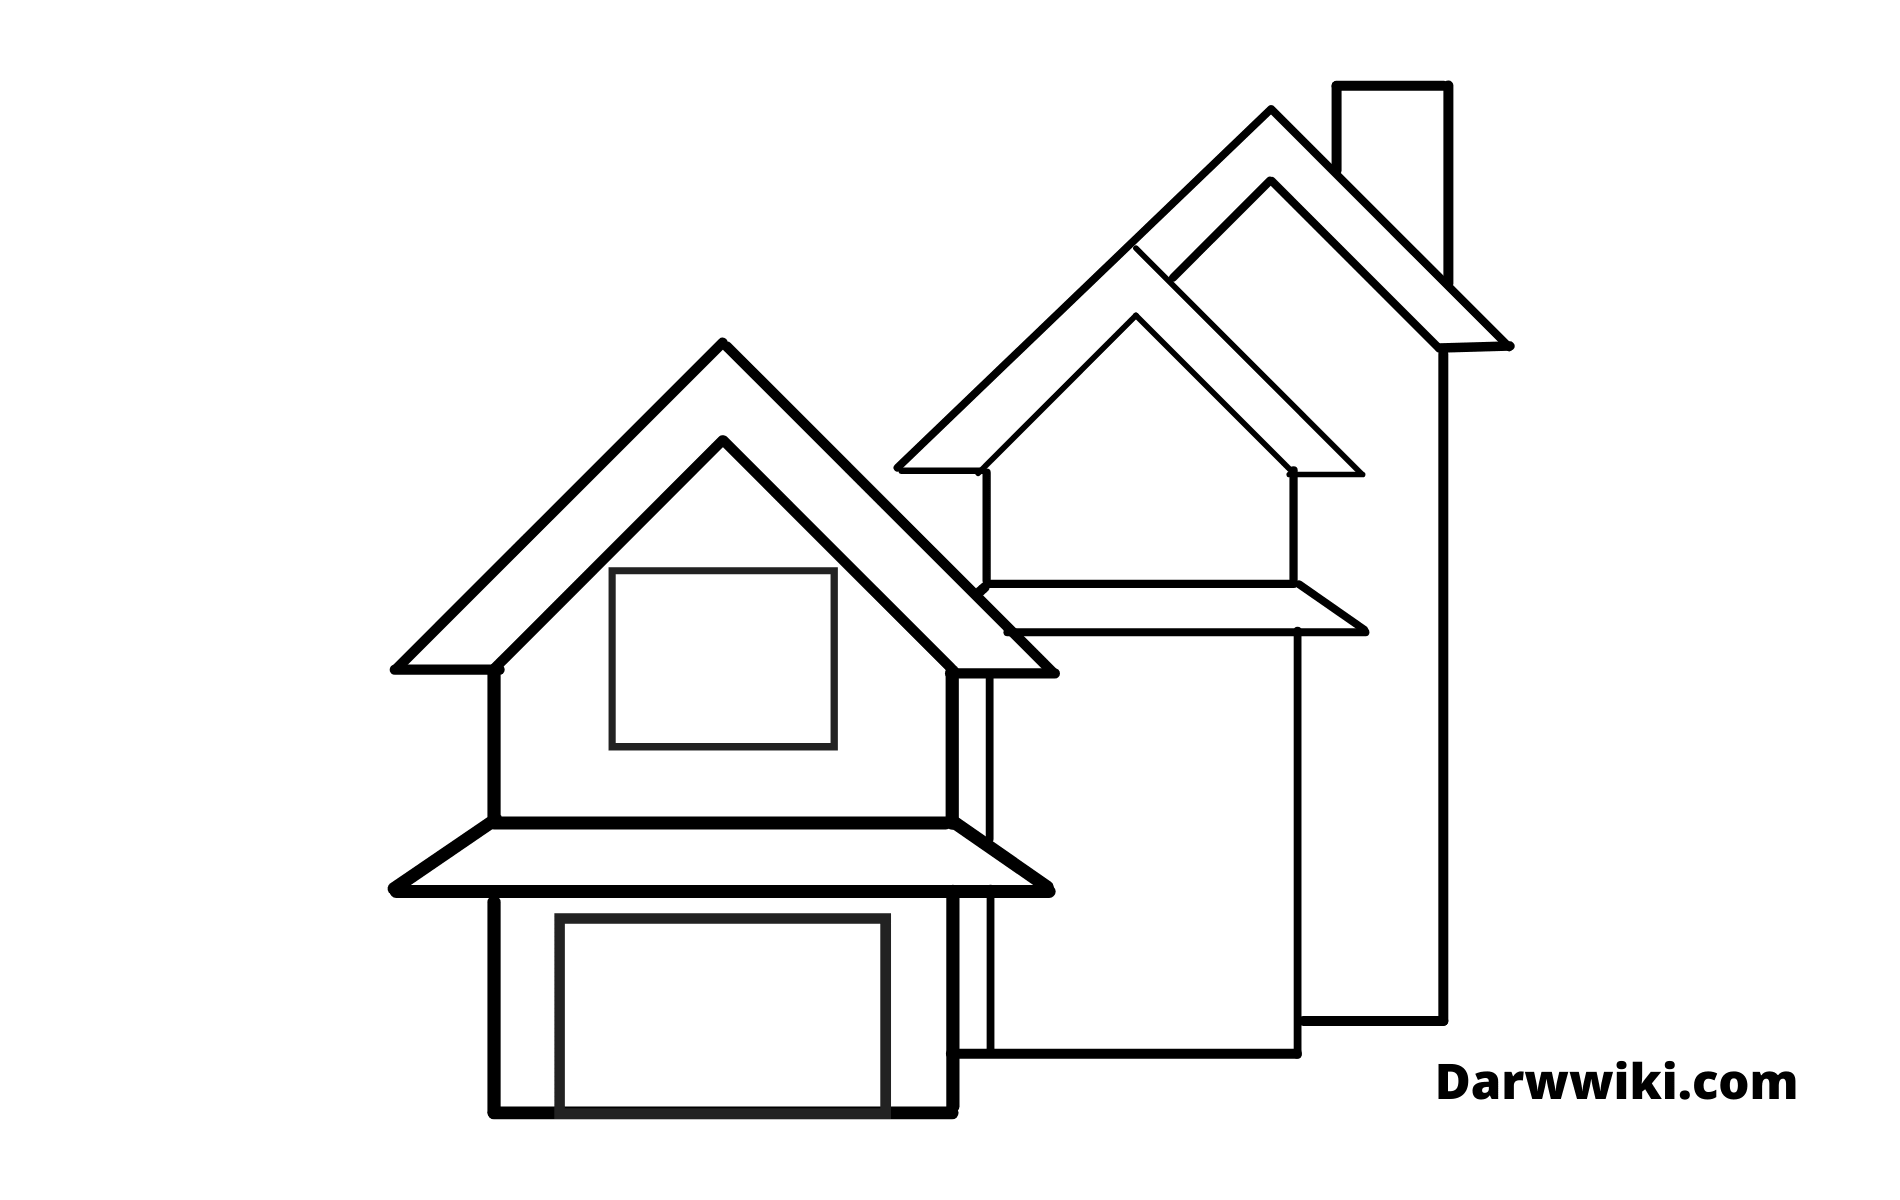 How To Draw House Step 6 - Draw the Chimney and Wall Outline